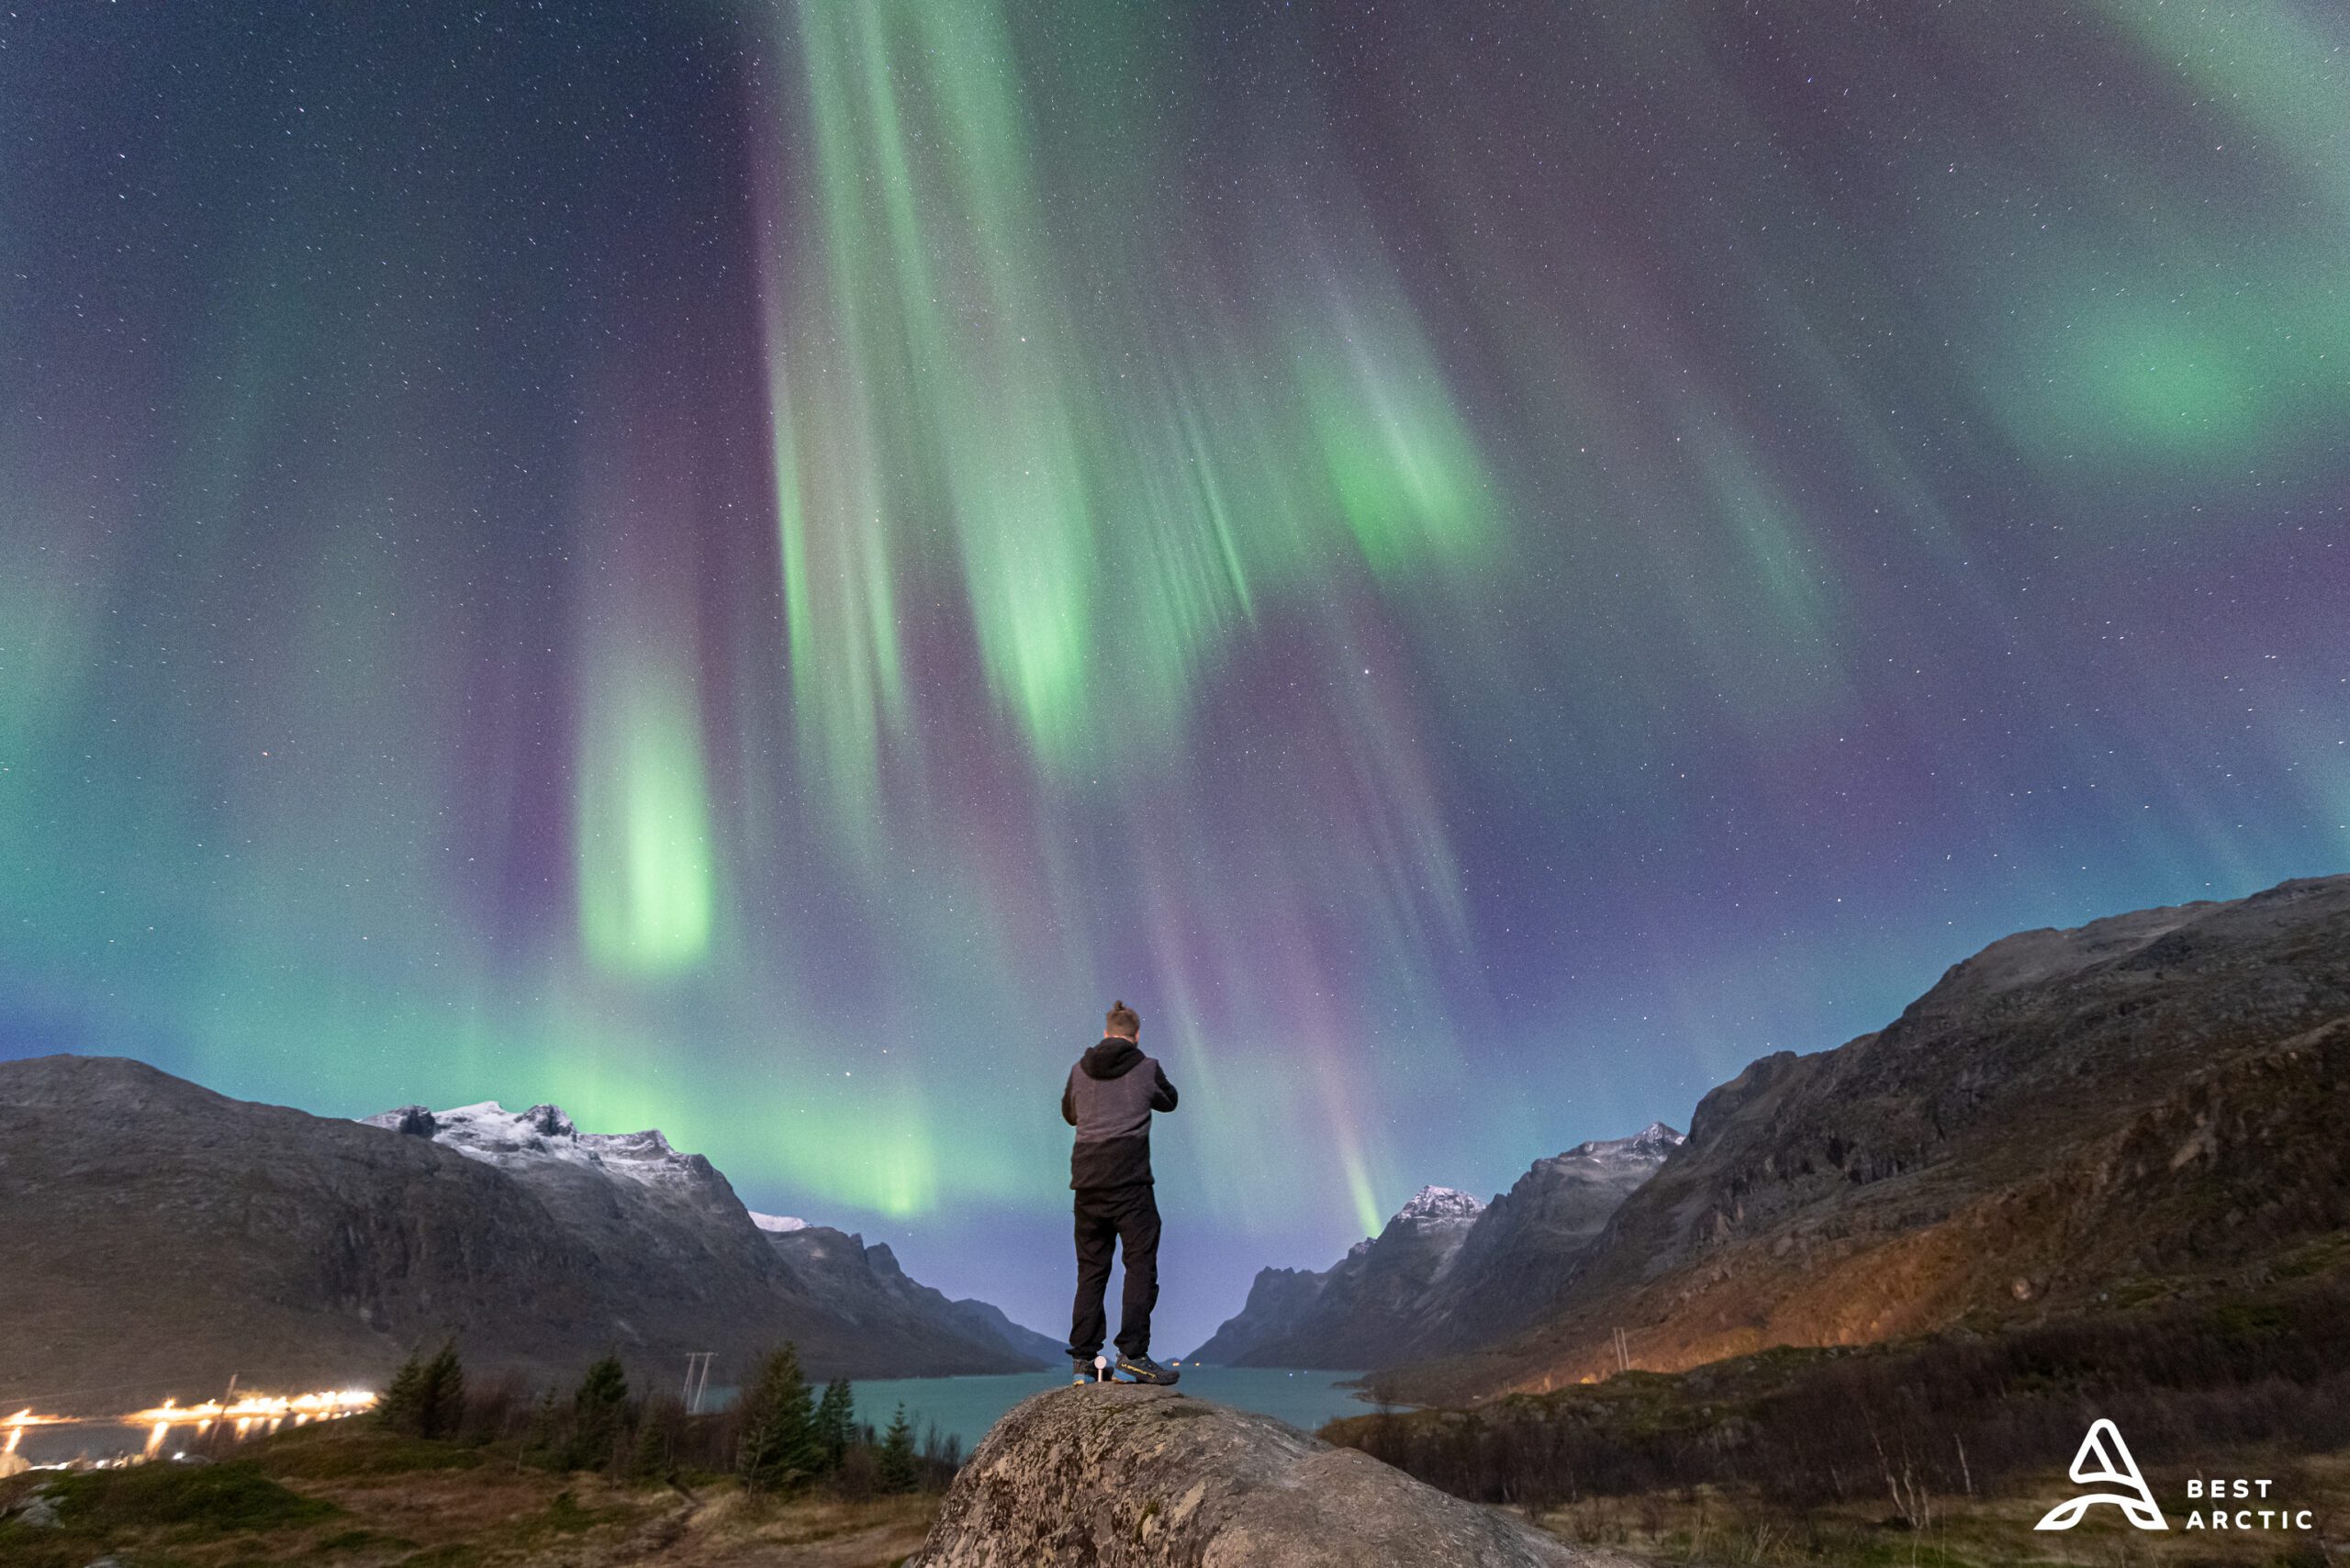 A picture taken from the back of a person witnessing a colorful aurora borealis surrounded by a magnificent fjord